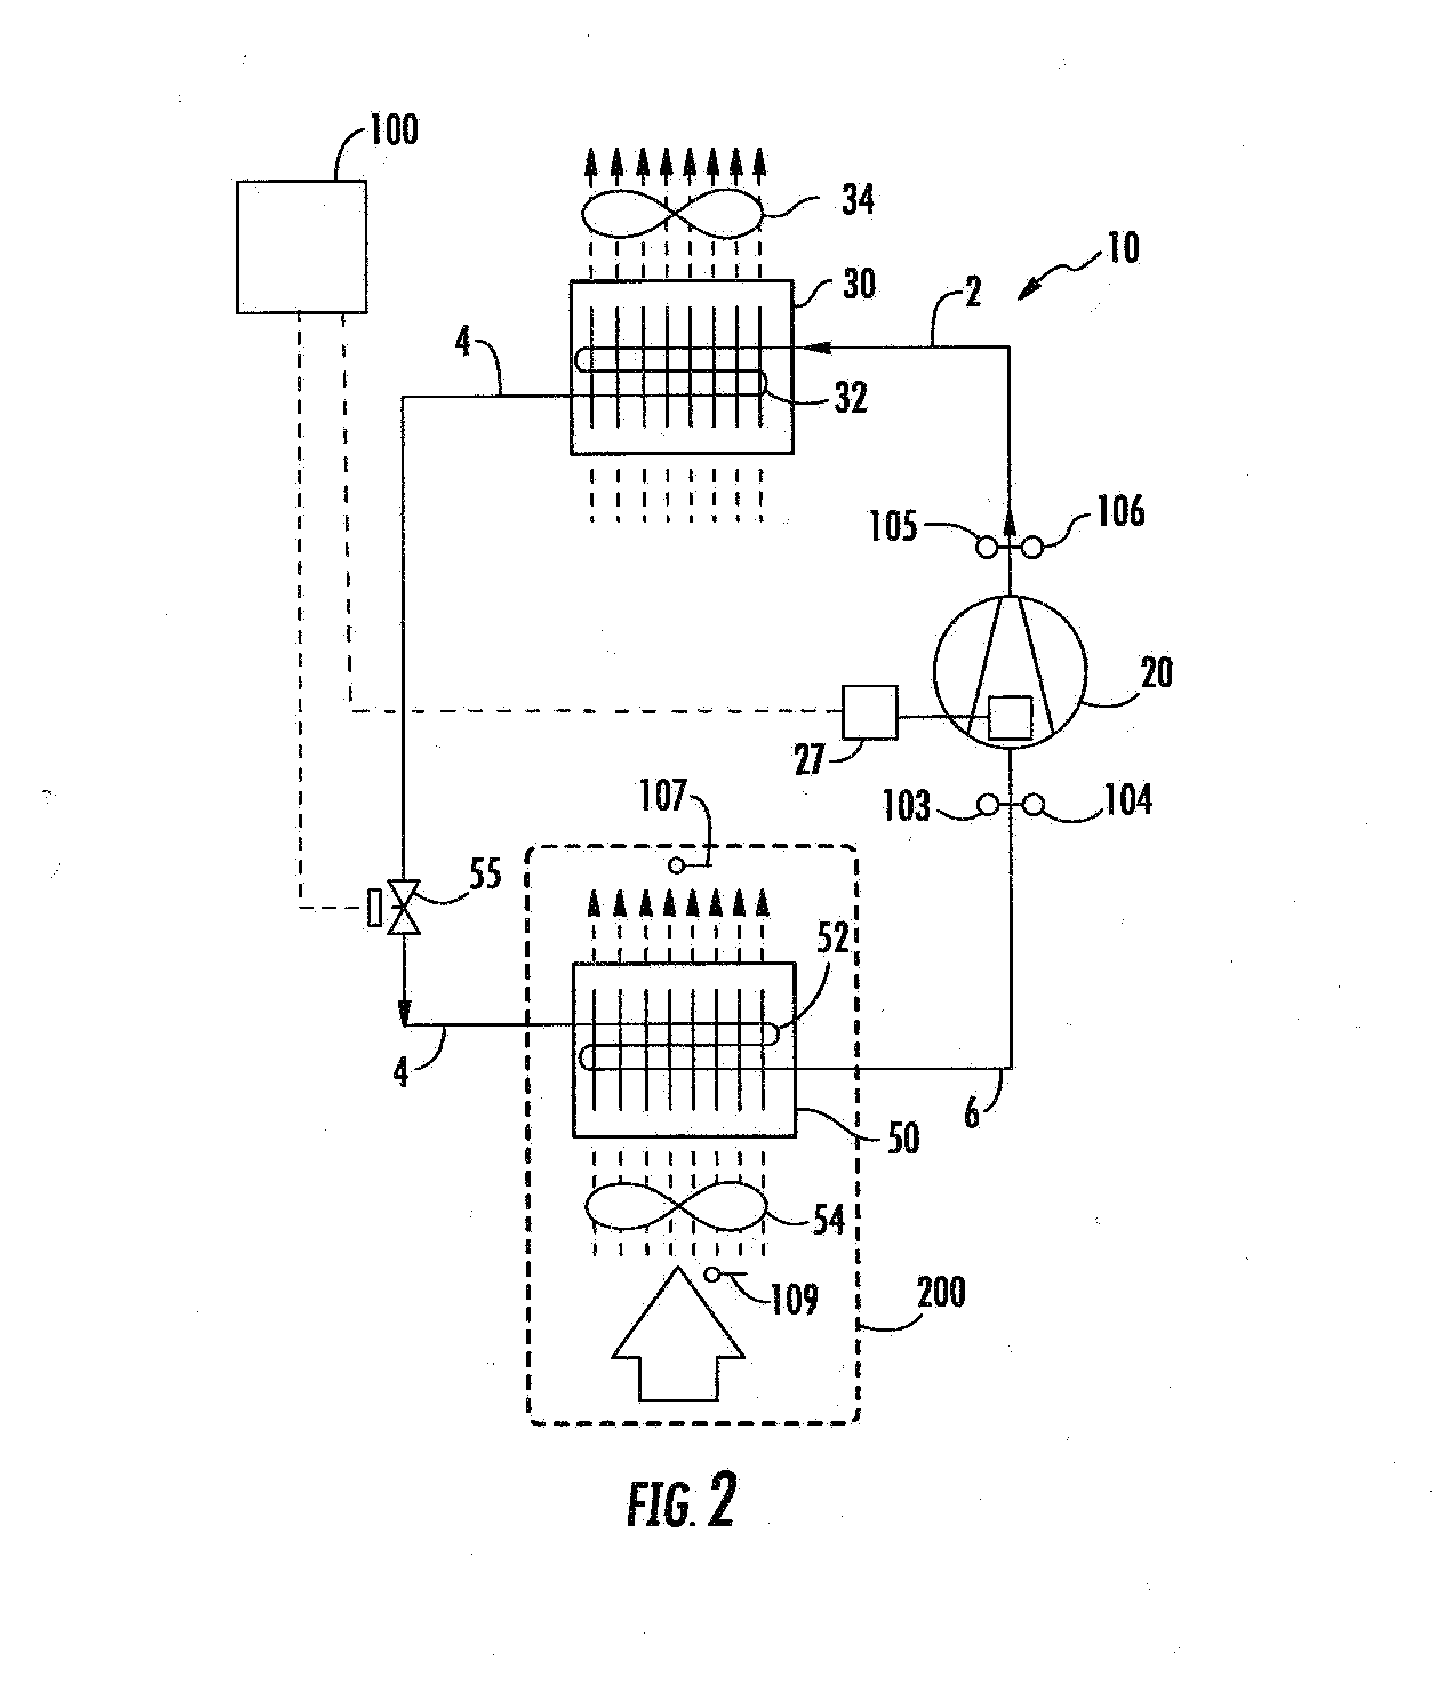 Method For Detection Of Loss Of Refrigerant